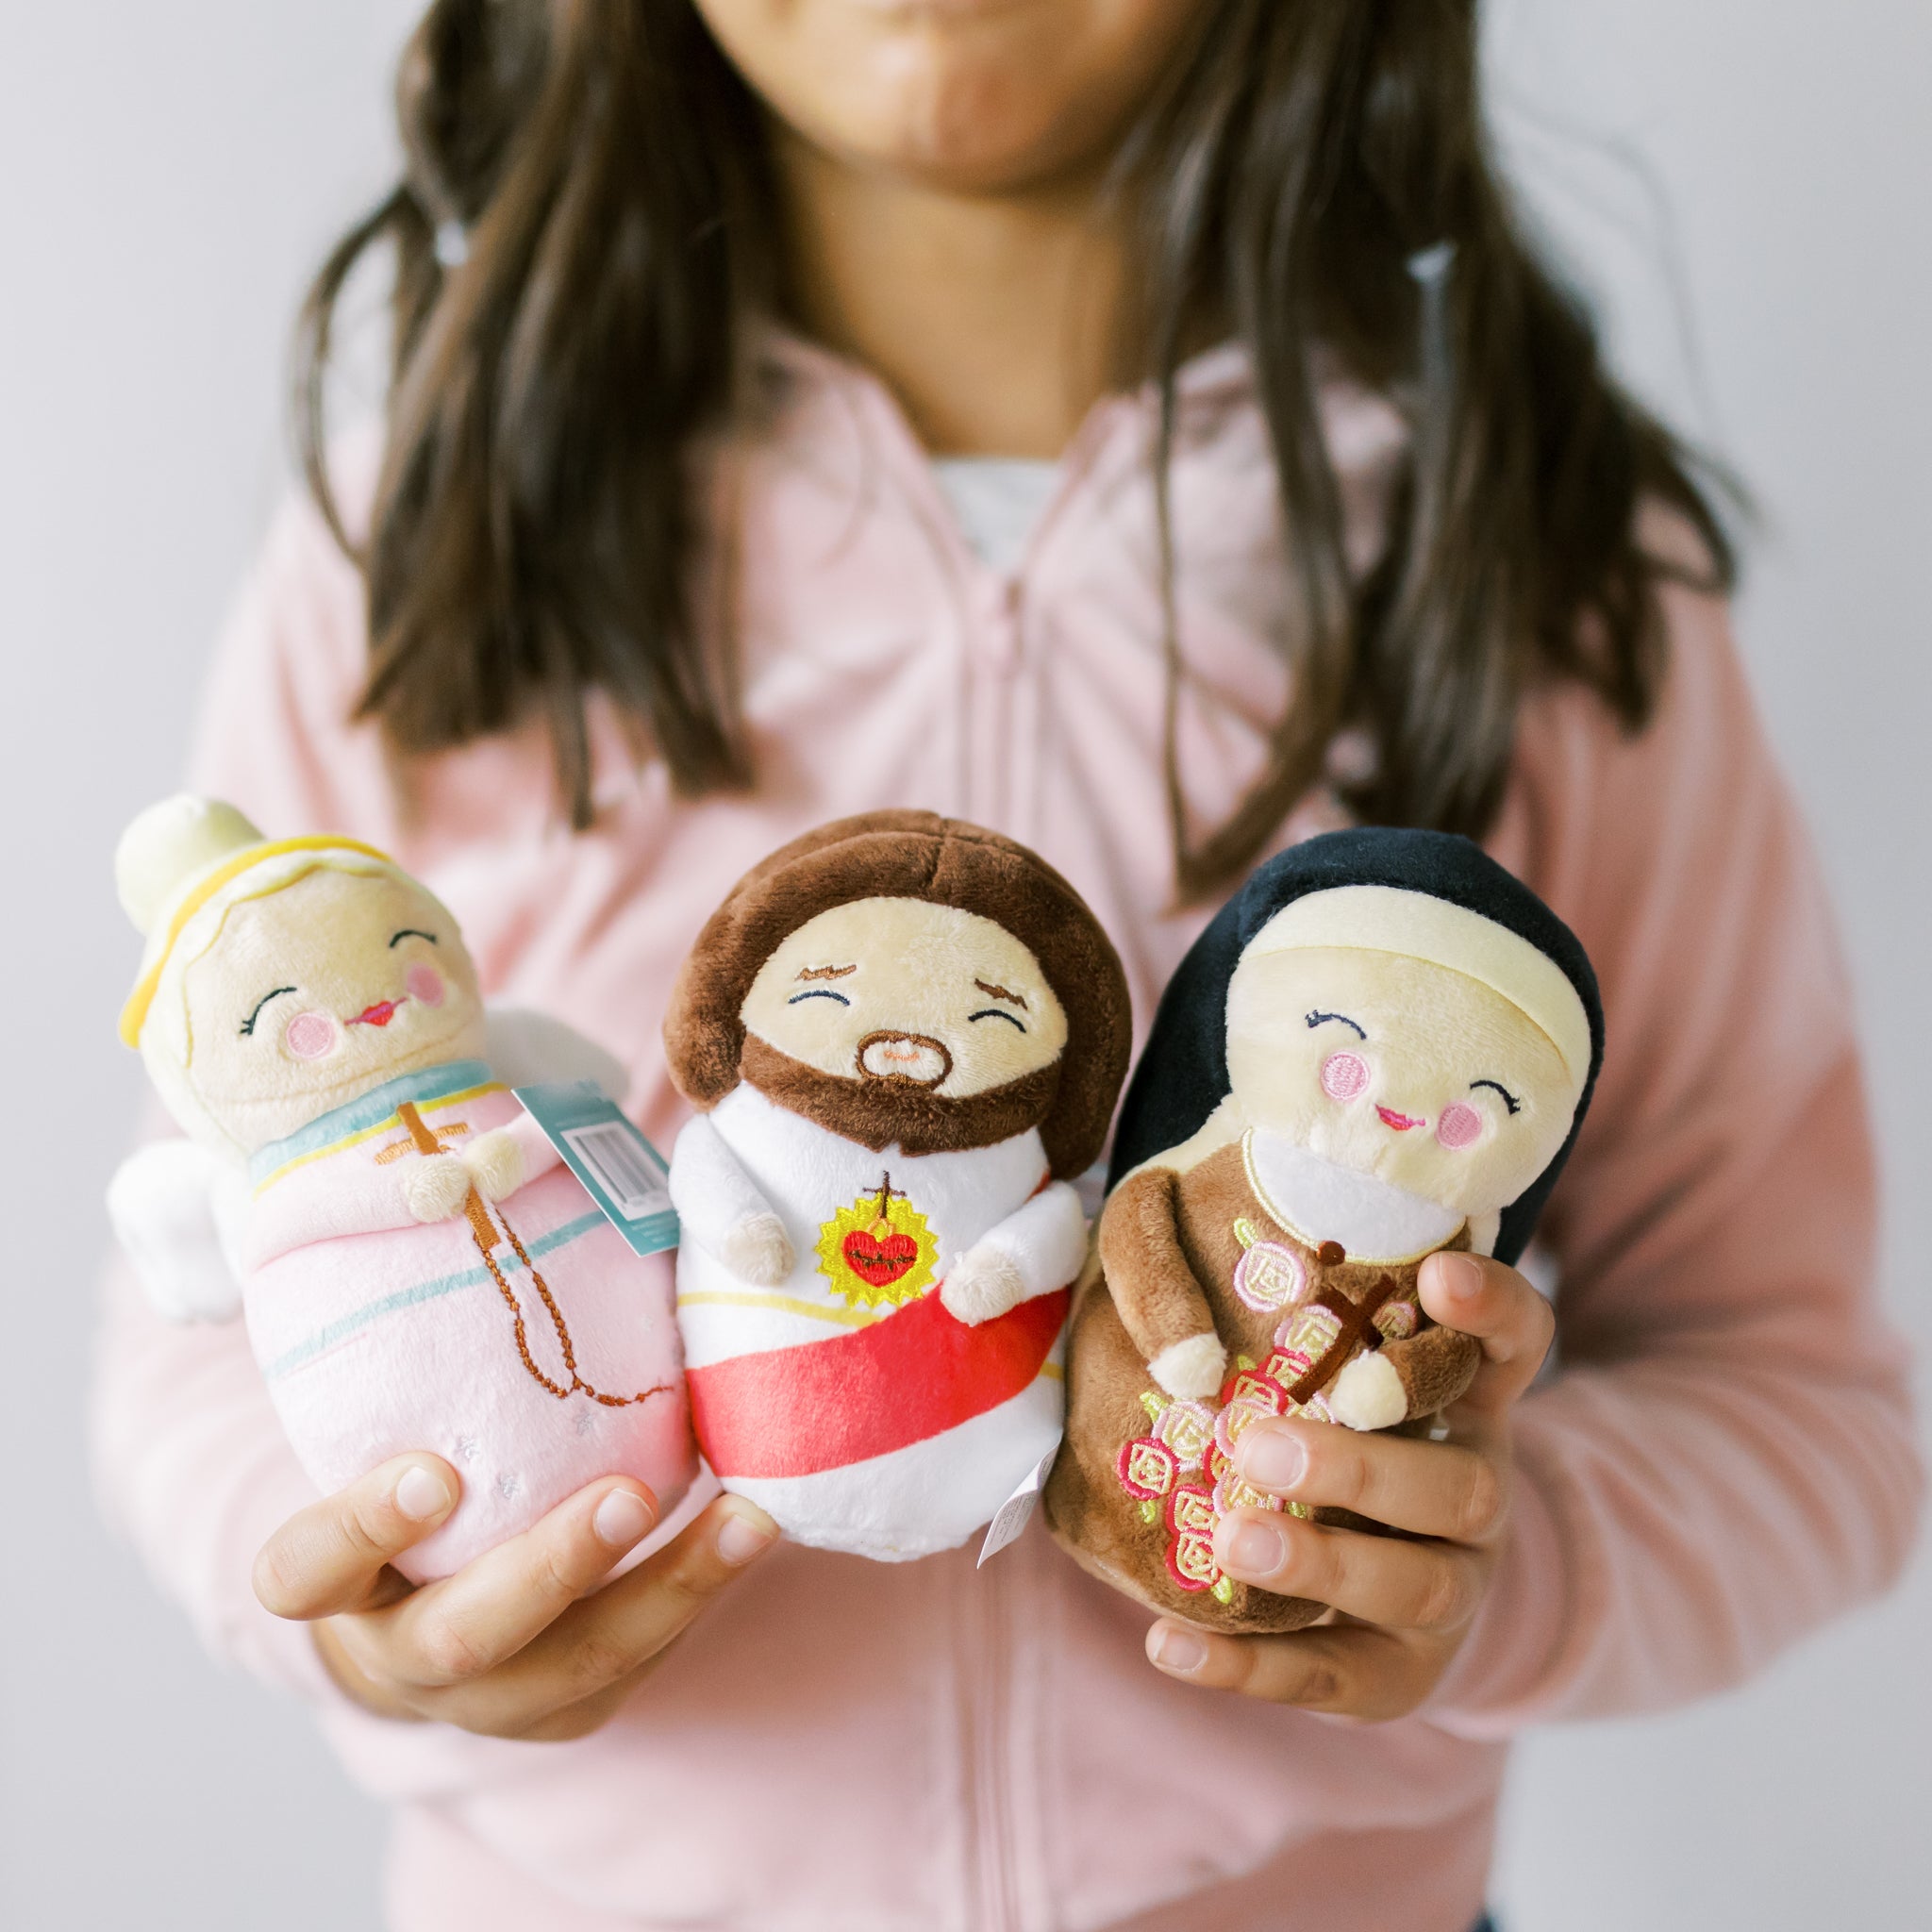 Mini St. Therese Of Lisieux Plush Doll